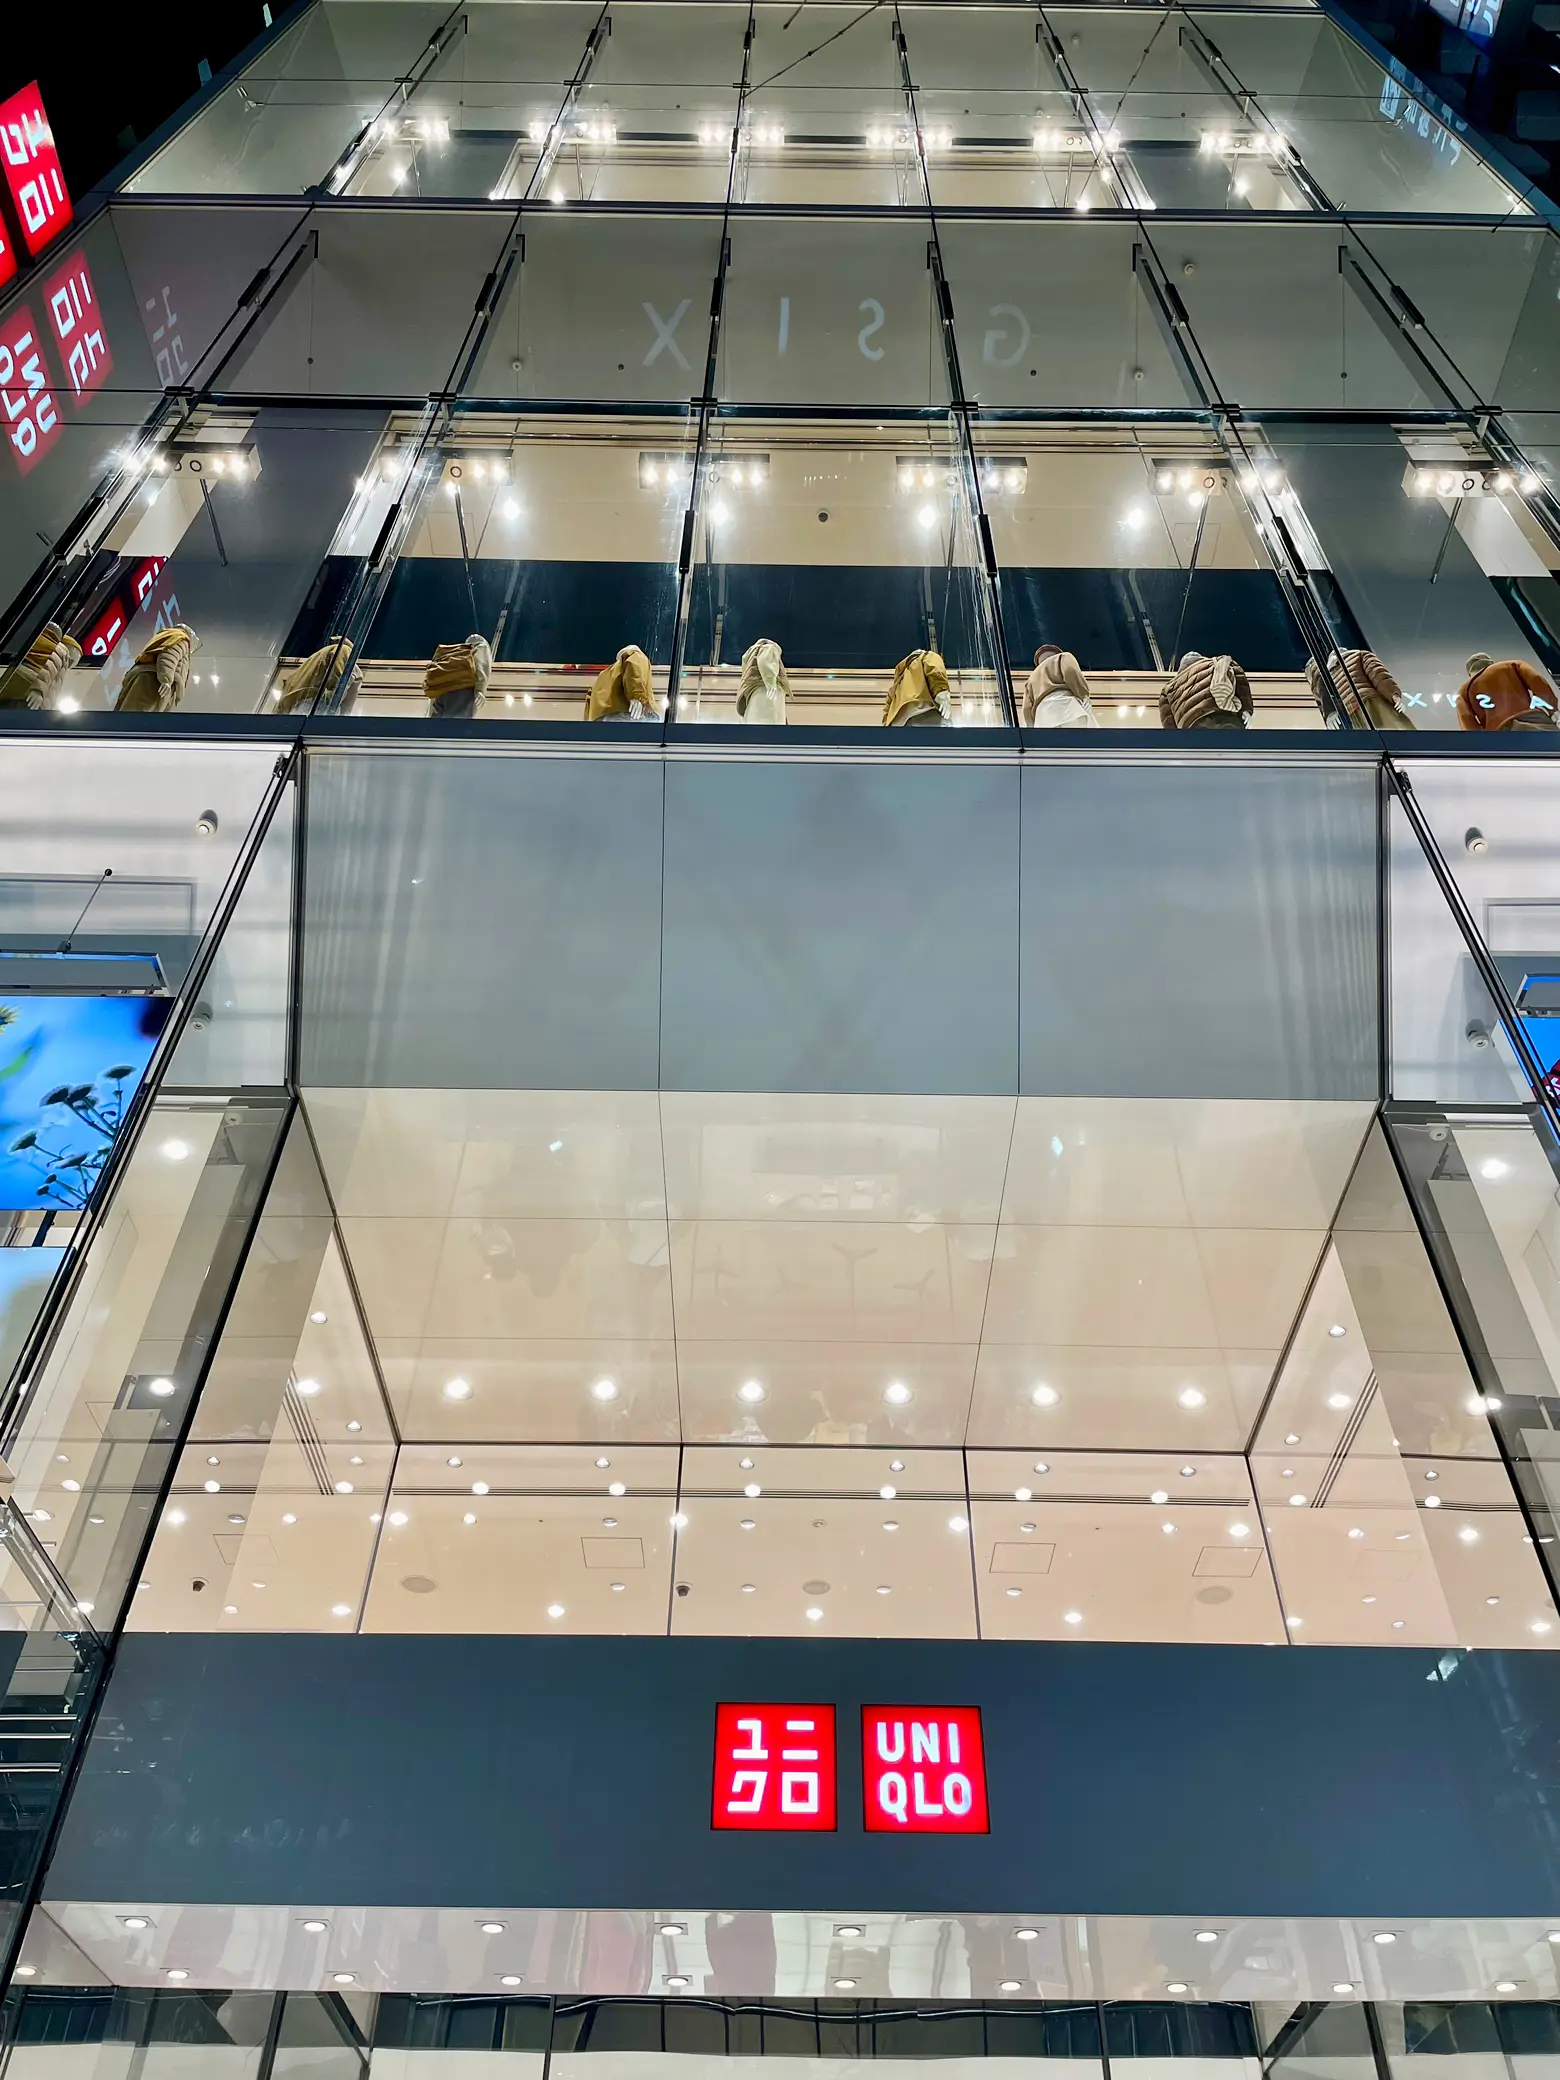 Uniqlo flagship store in Ginza Tokyo is enormous